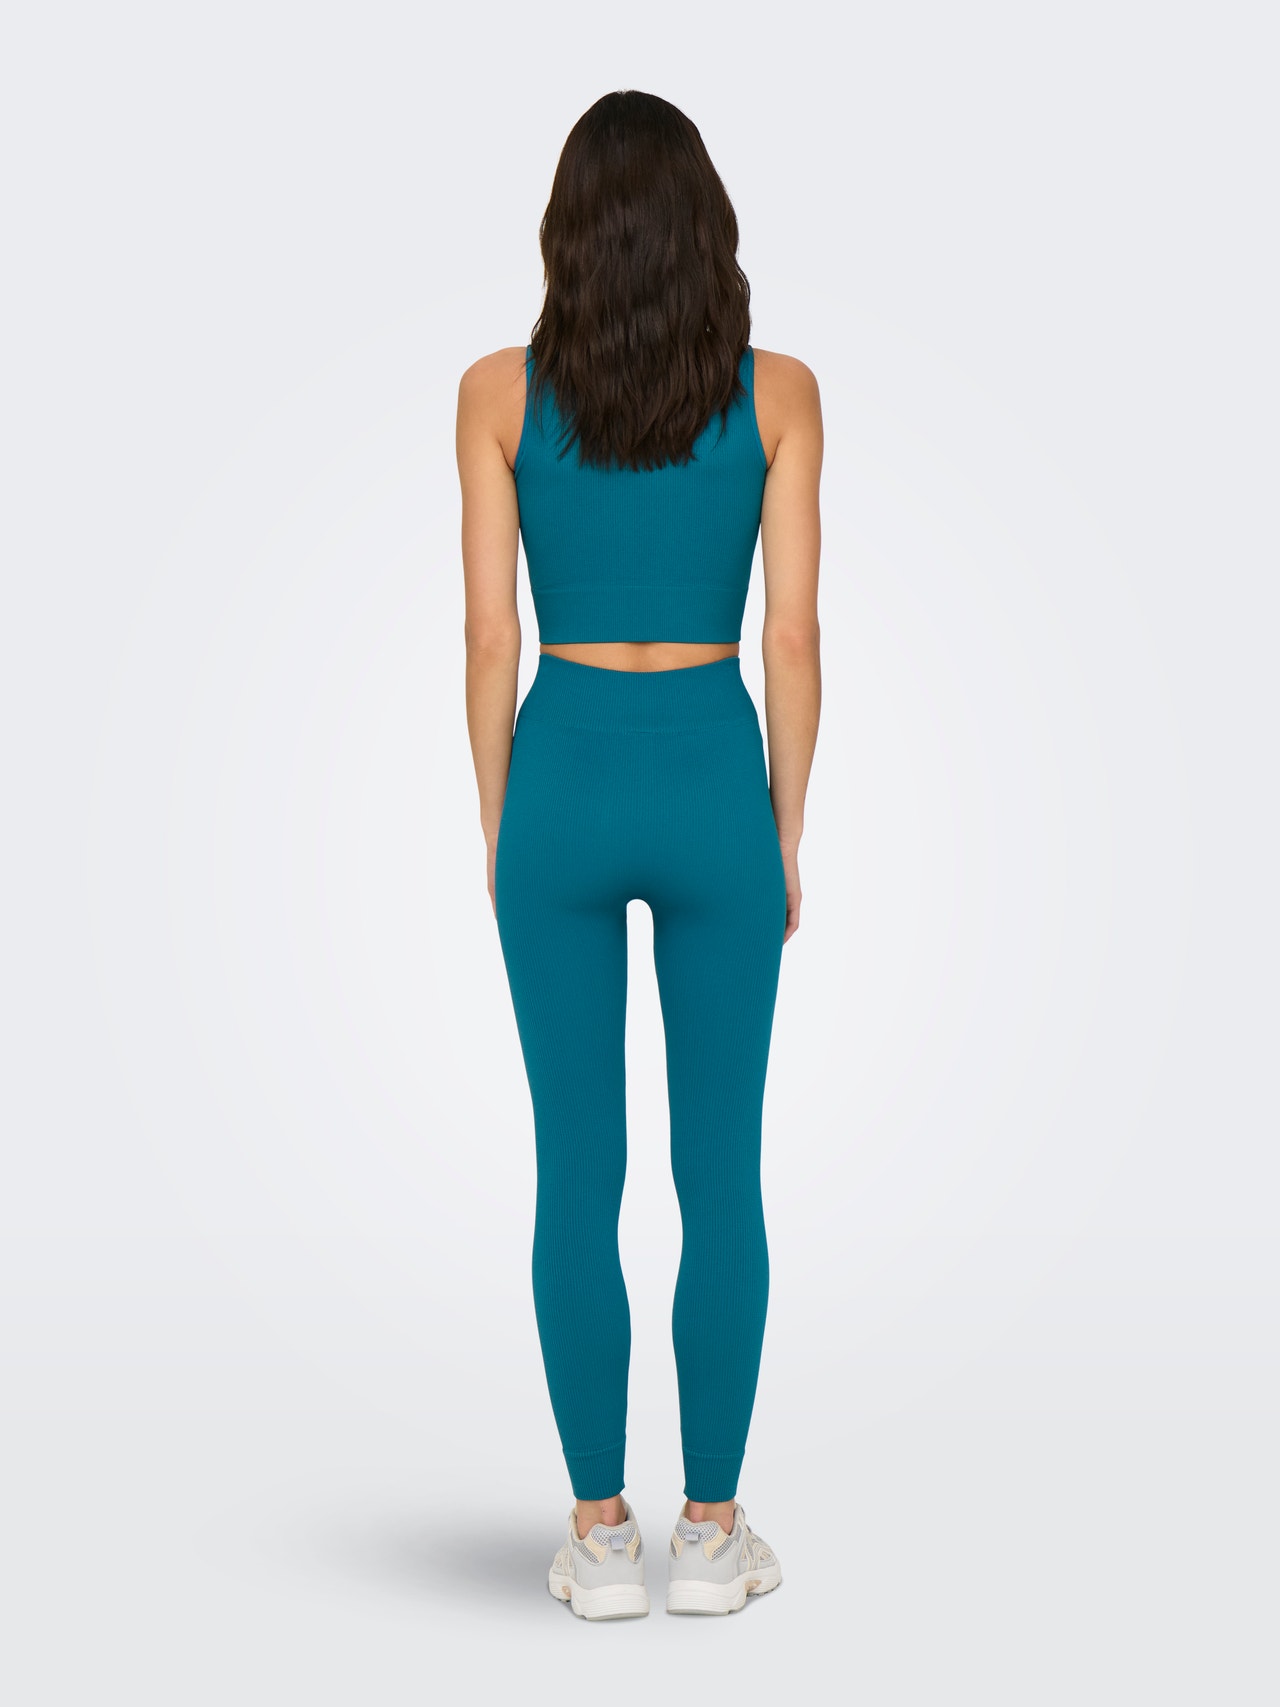 ONLY Seamless Cropped Training Top -Dragonfly - 15250051